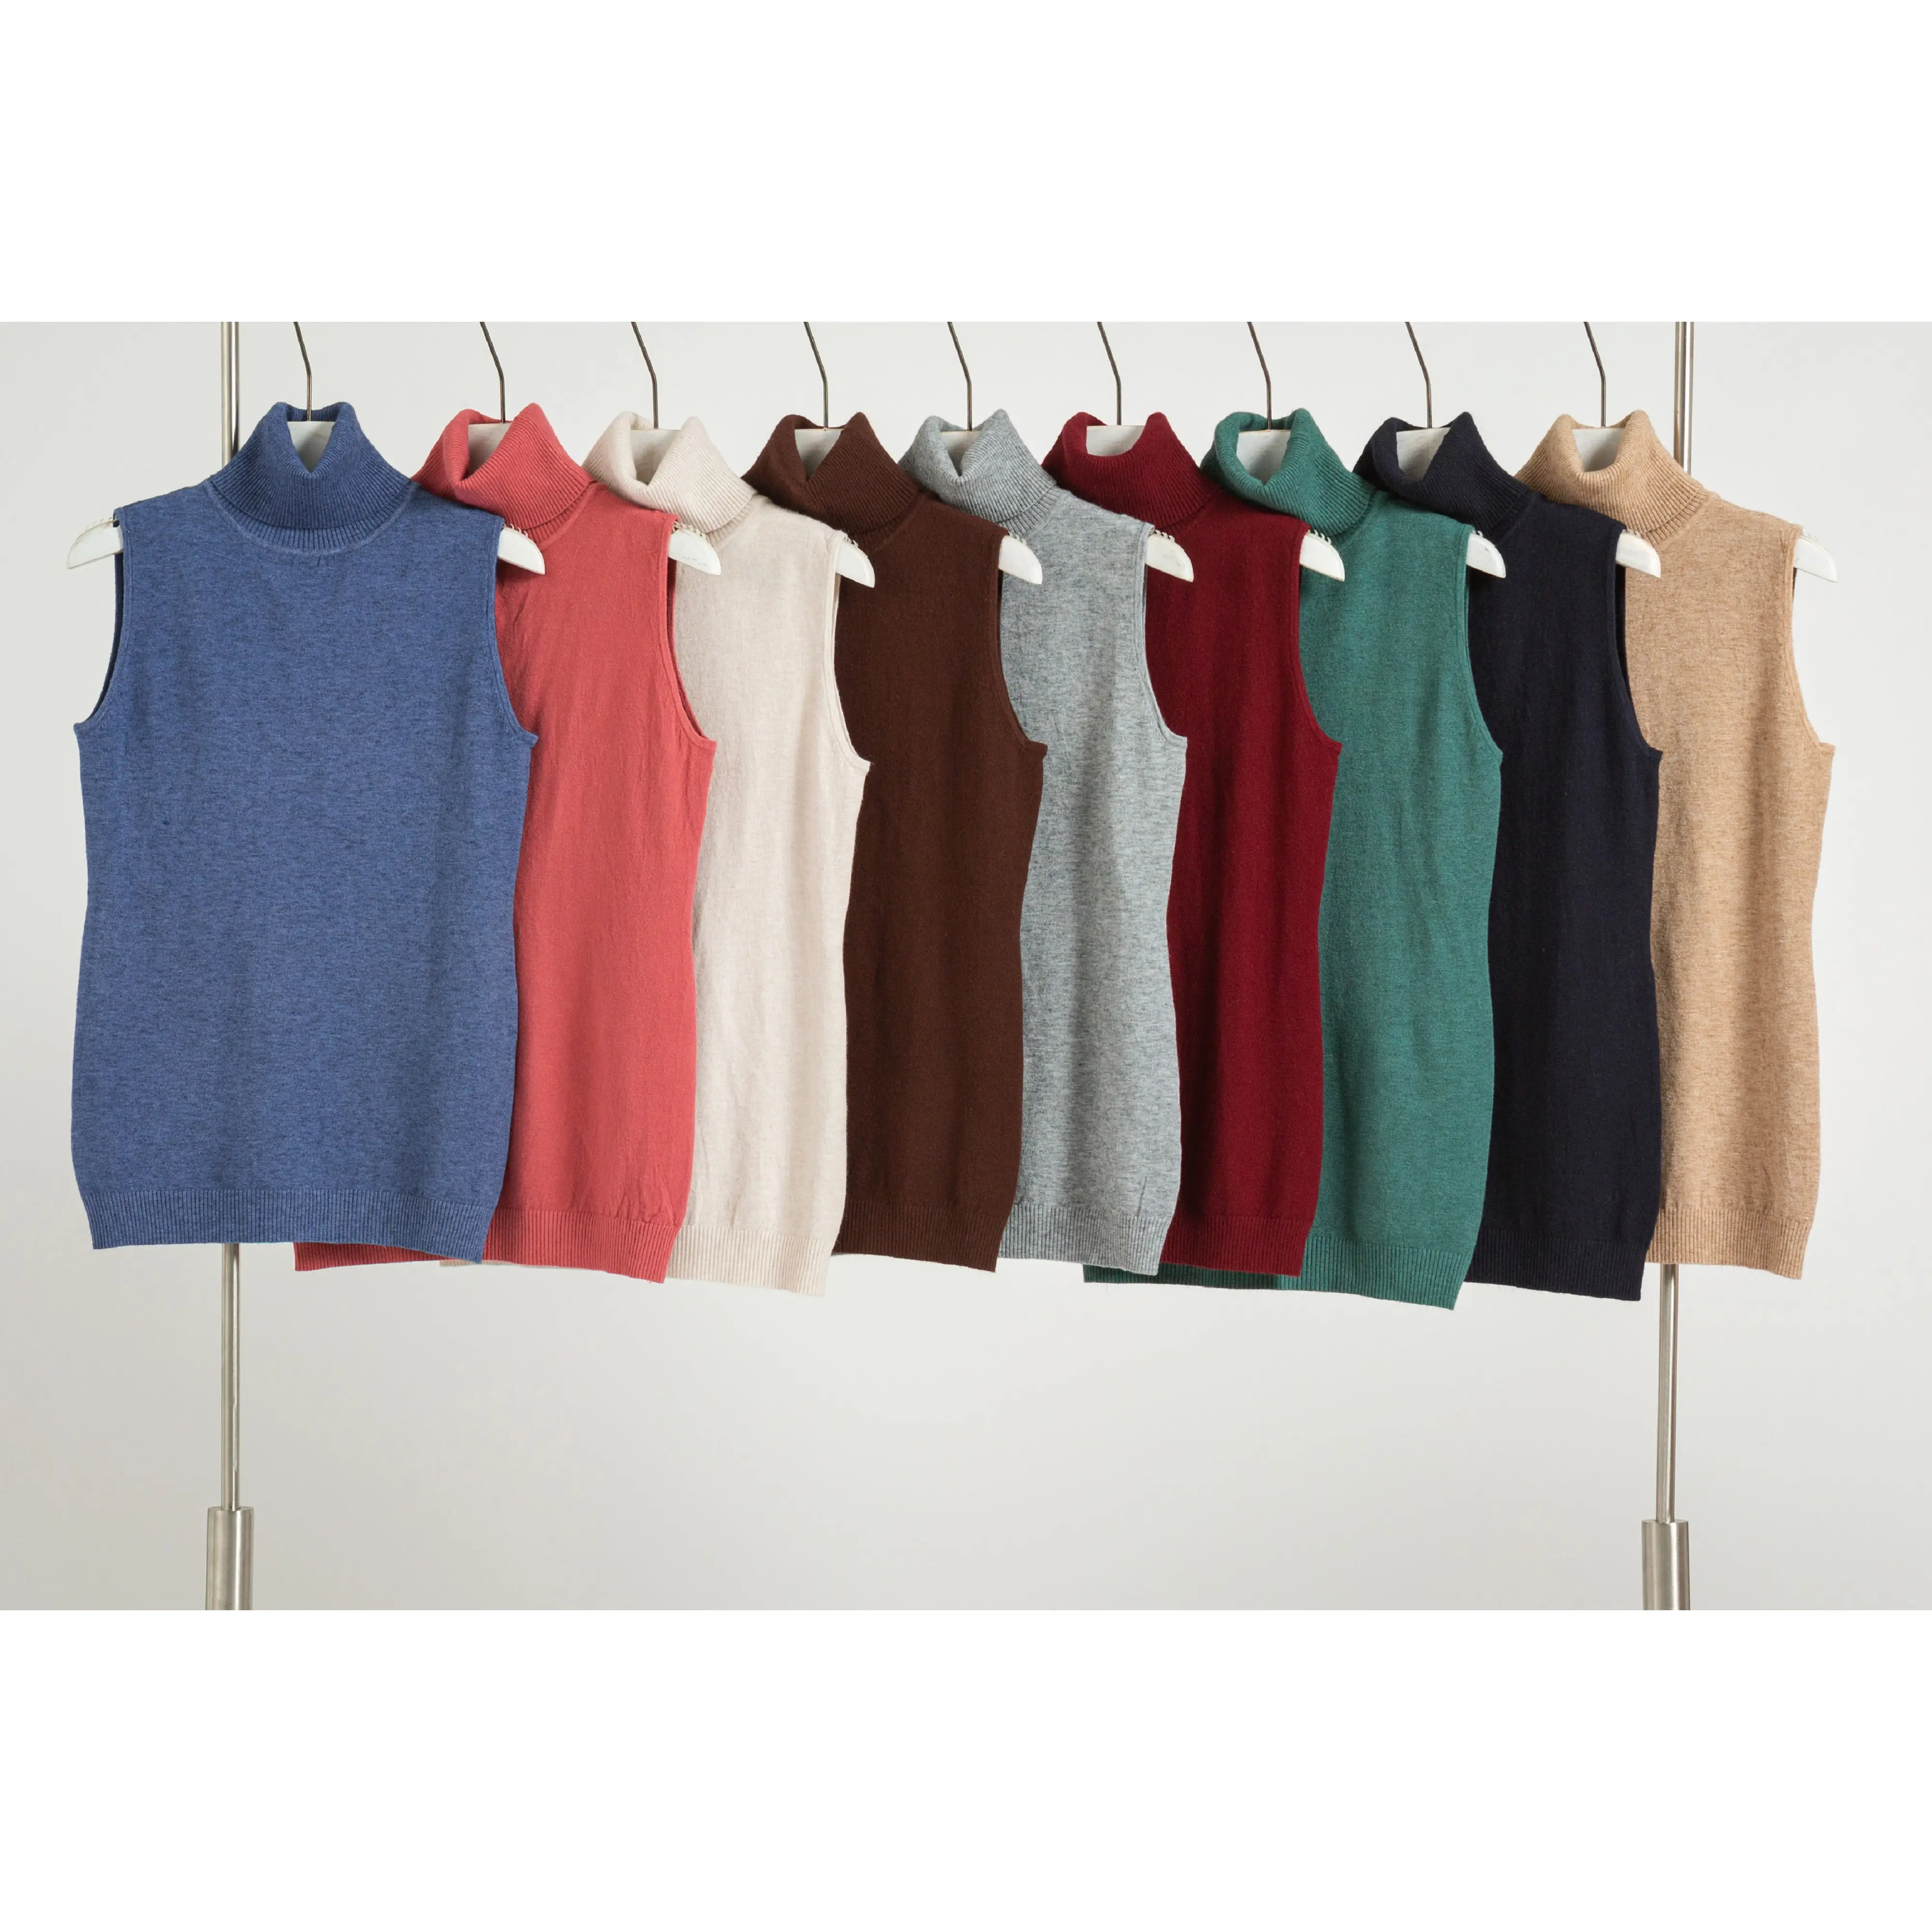 New Arrival Fashion Custom Top High Quality Turtle Neck Sleeveless Knitted SweaterためWomen